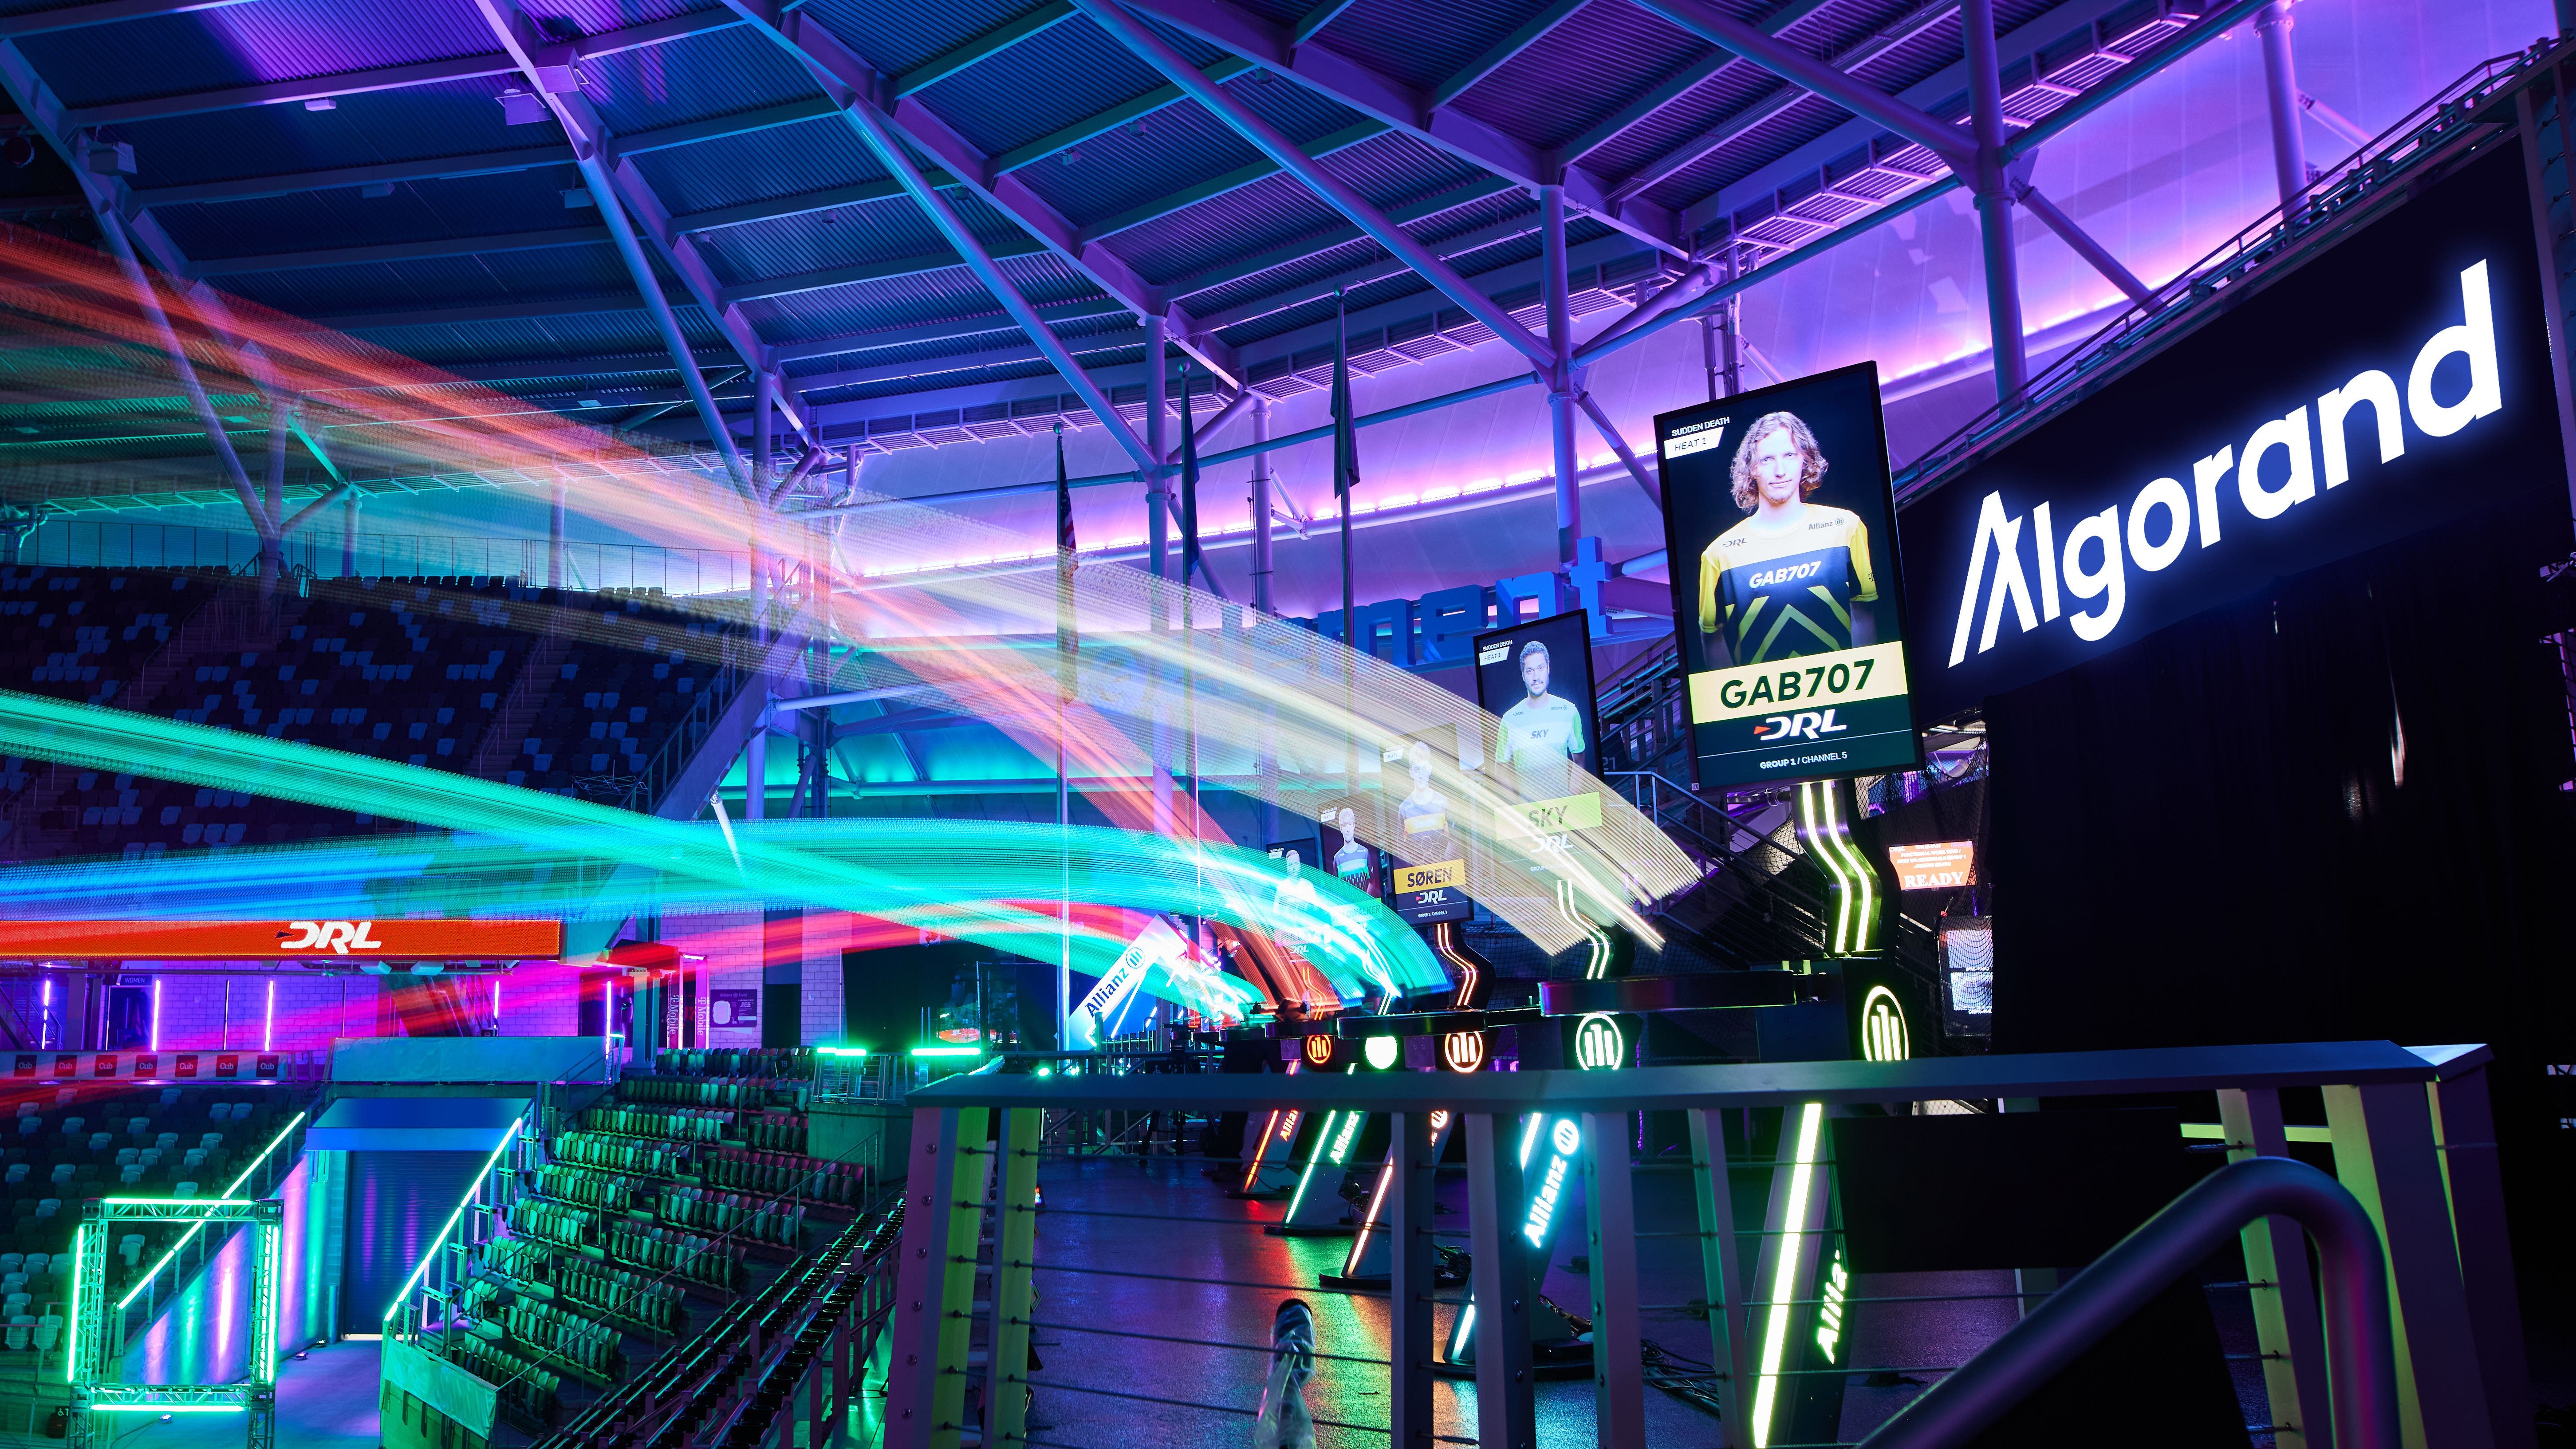 EXCLUSIVE: How The Drone Racing League Can Grow With NFTs, Blockchain And New Prime Time Media